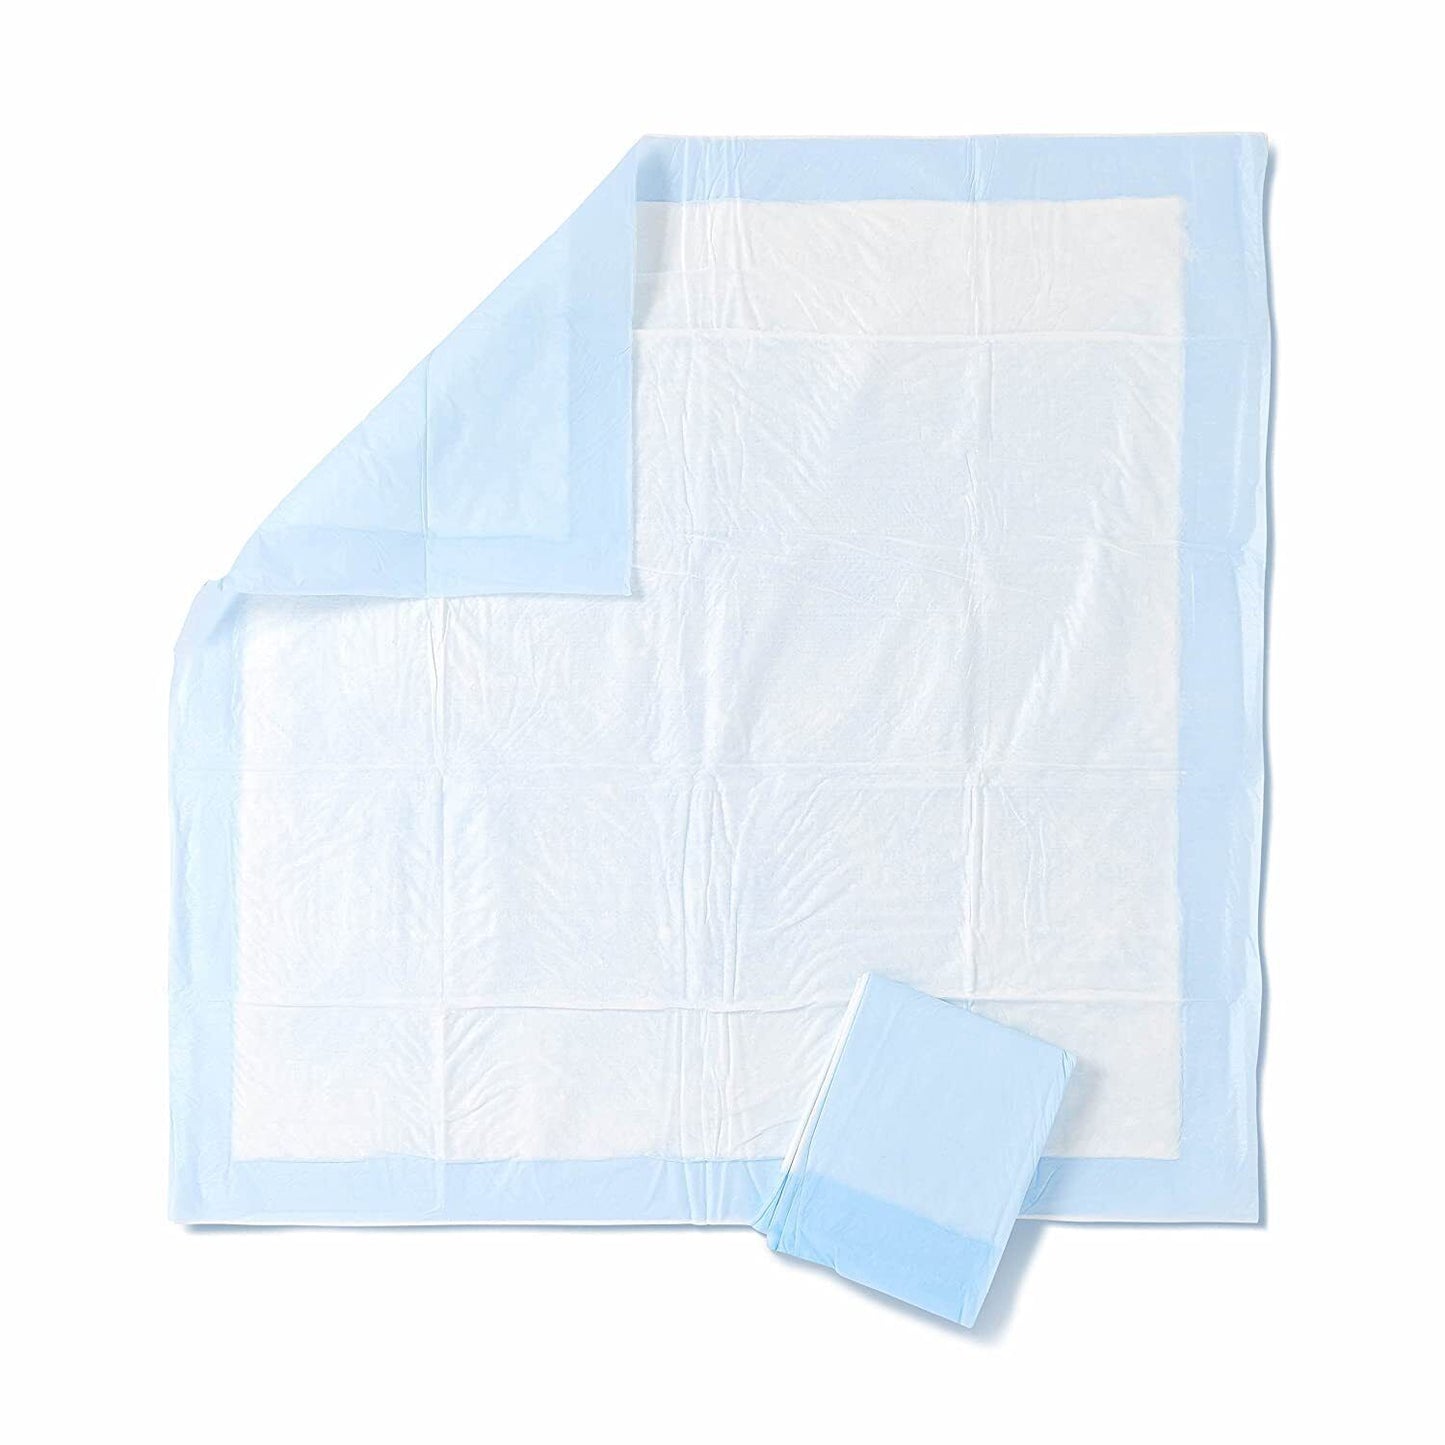 Medline Deluxe Fluff Incontinence Underpads Bed Pee Chux, 30 x 30, 90 Pads